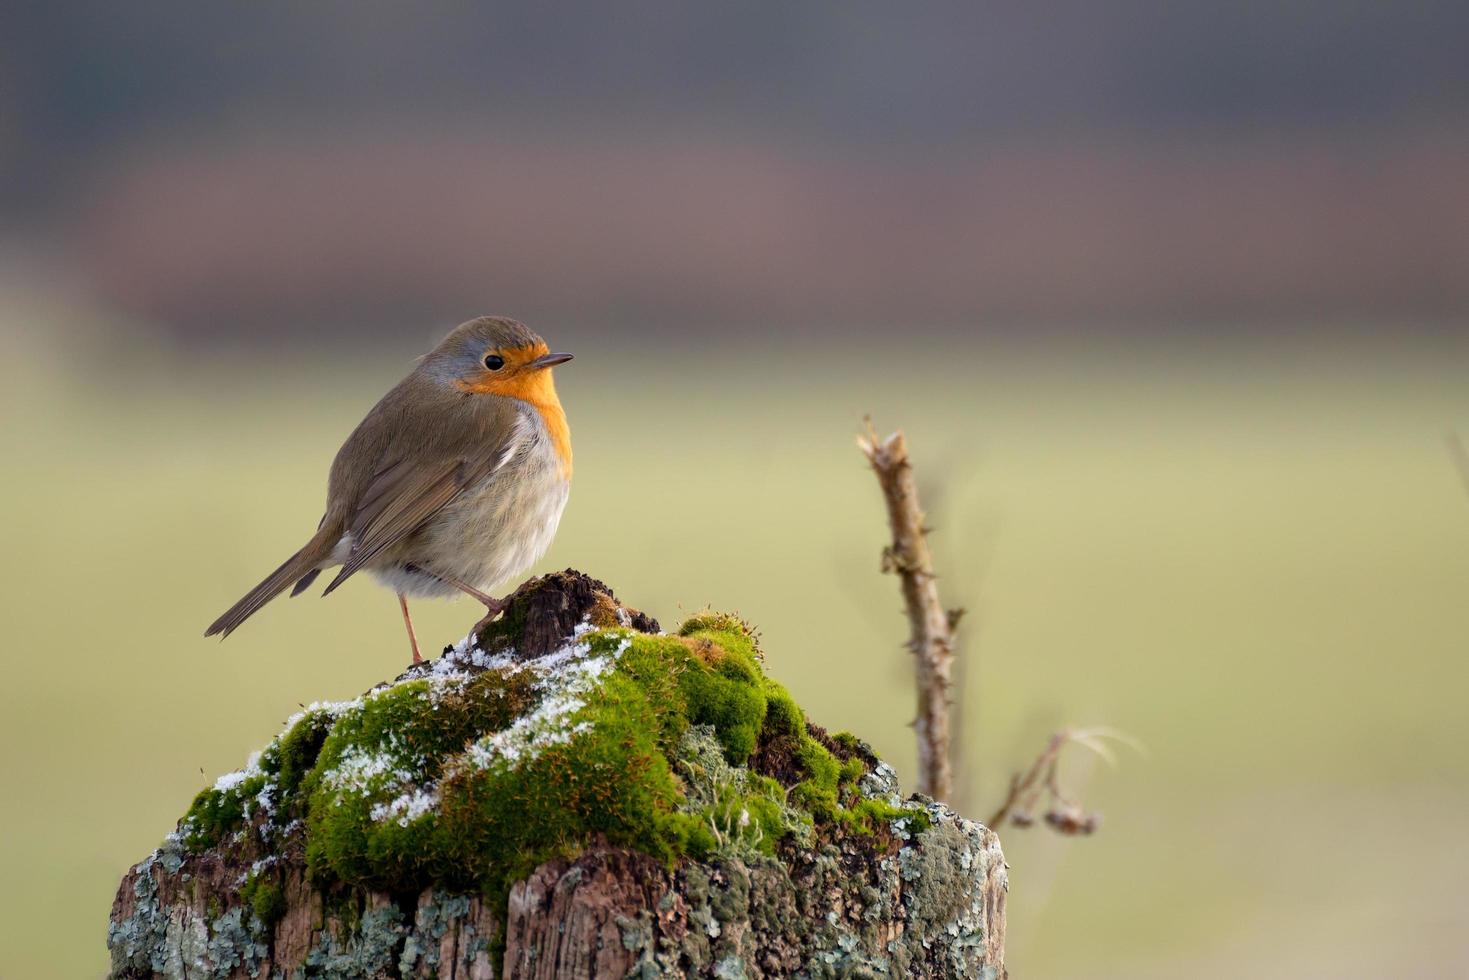 Robin standing on a tree stump covered with moss and some snow flakes photo